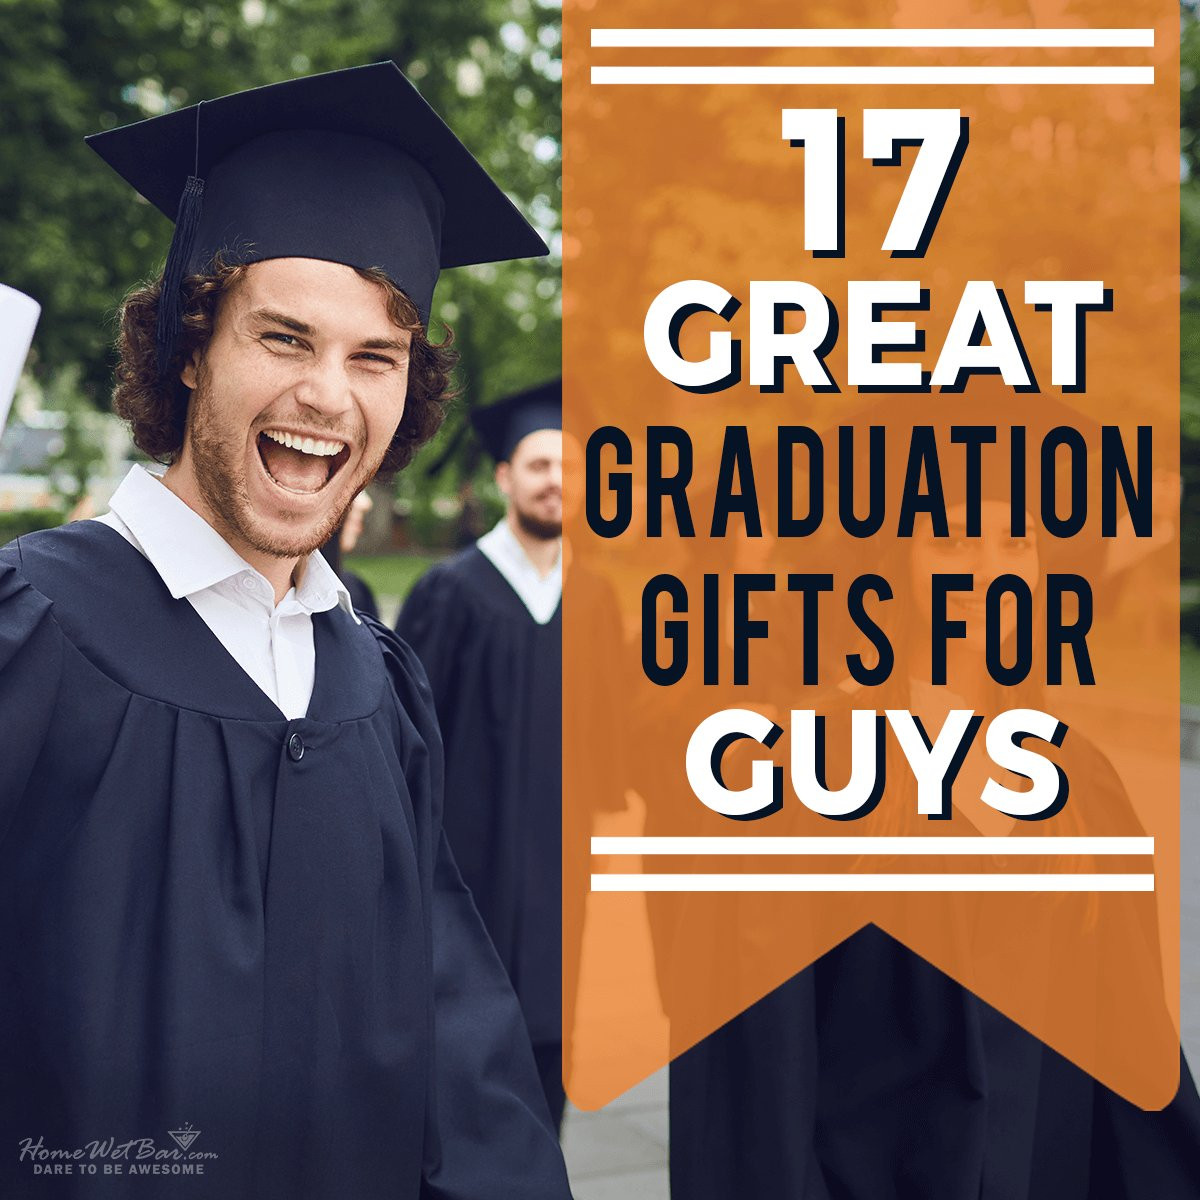 Great Graduation Gift Ideas
 17 Great Graduation Gifts for Guys